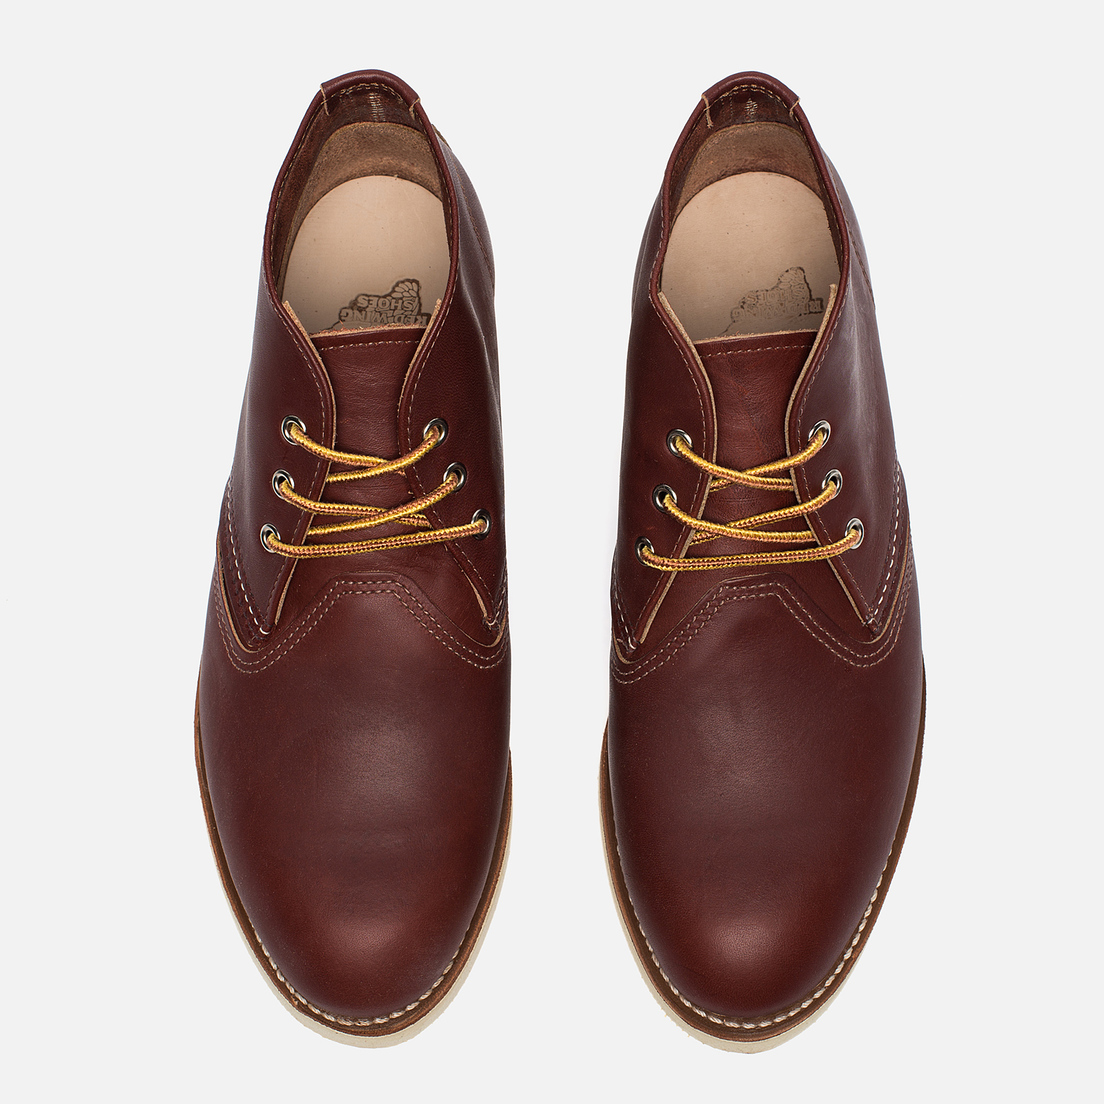 Red Wing Shoes Мужские ботинки 3139 Work Chukka Worksmith Leather